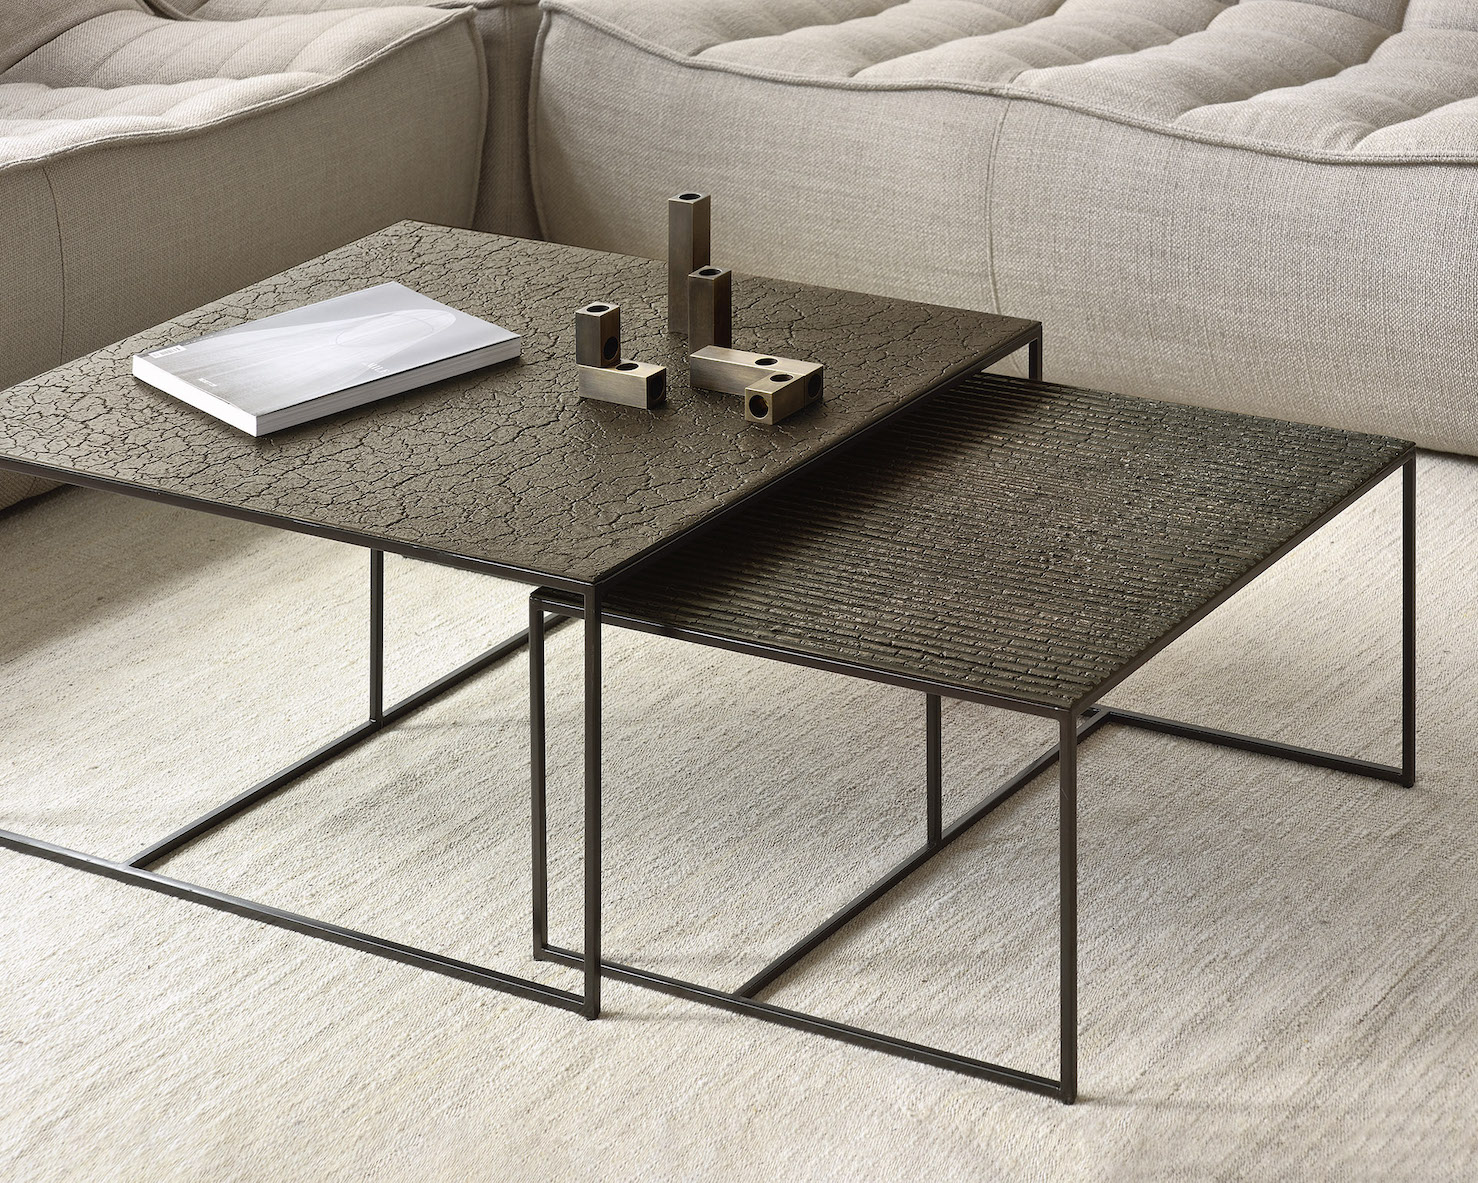 Getting The Perfect Coffee Table For Your Home